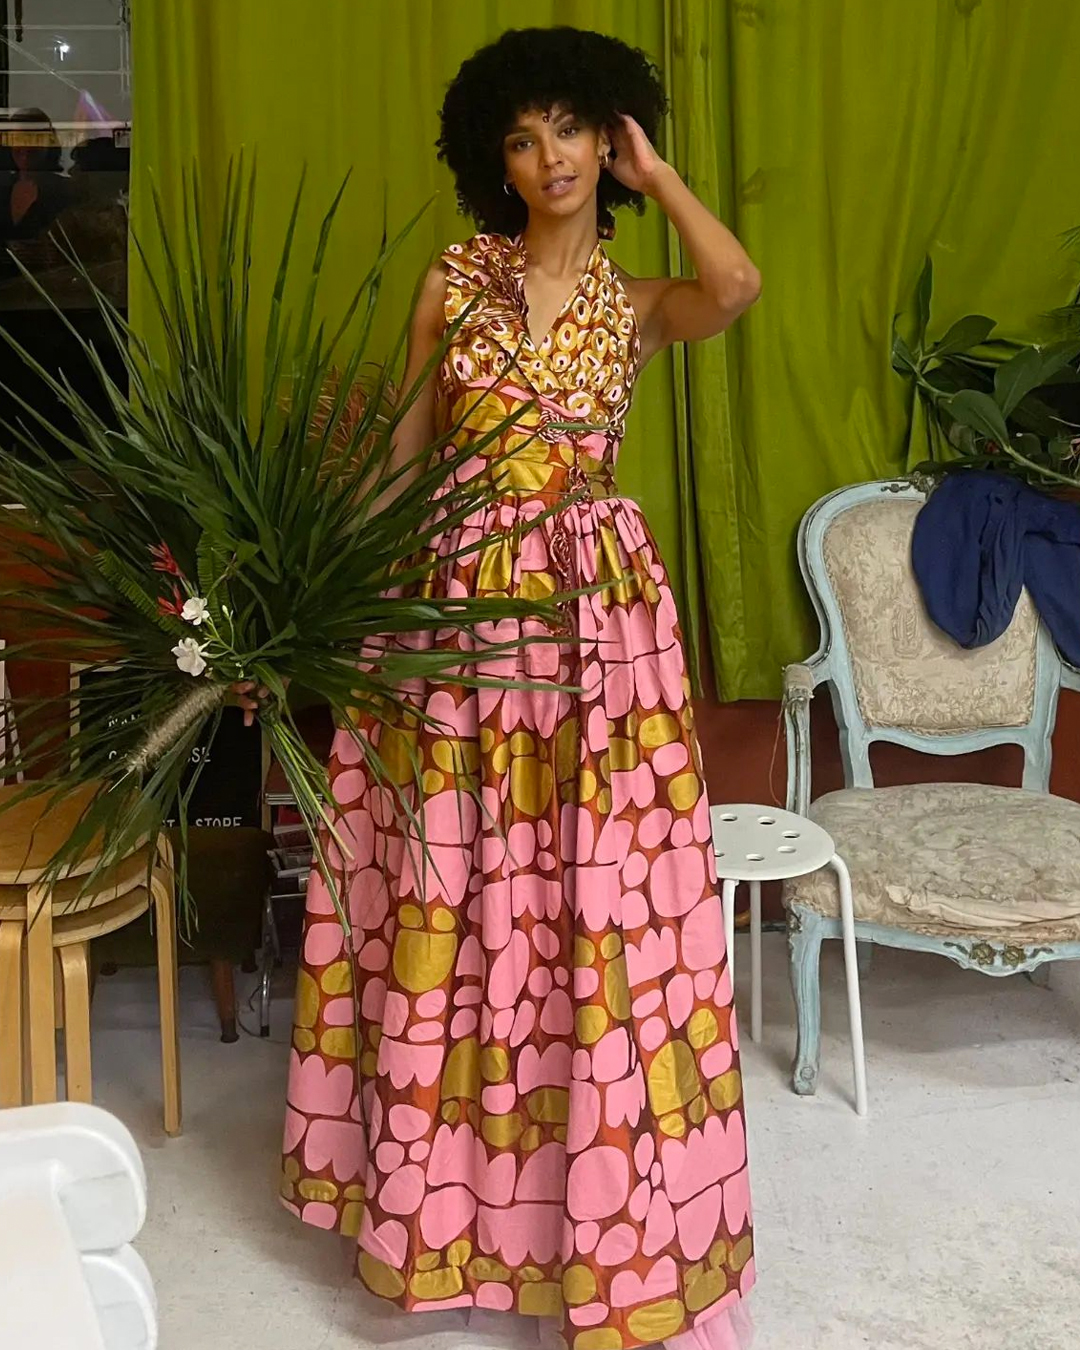 a person wearing a frock and posing